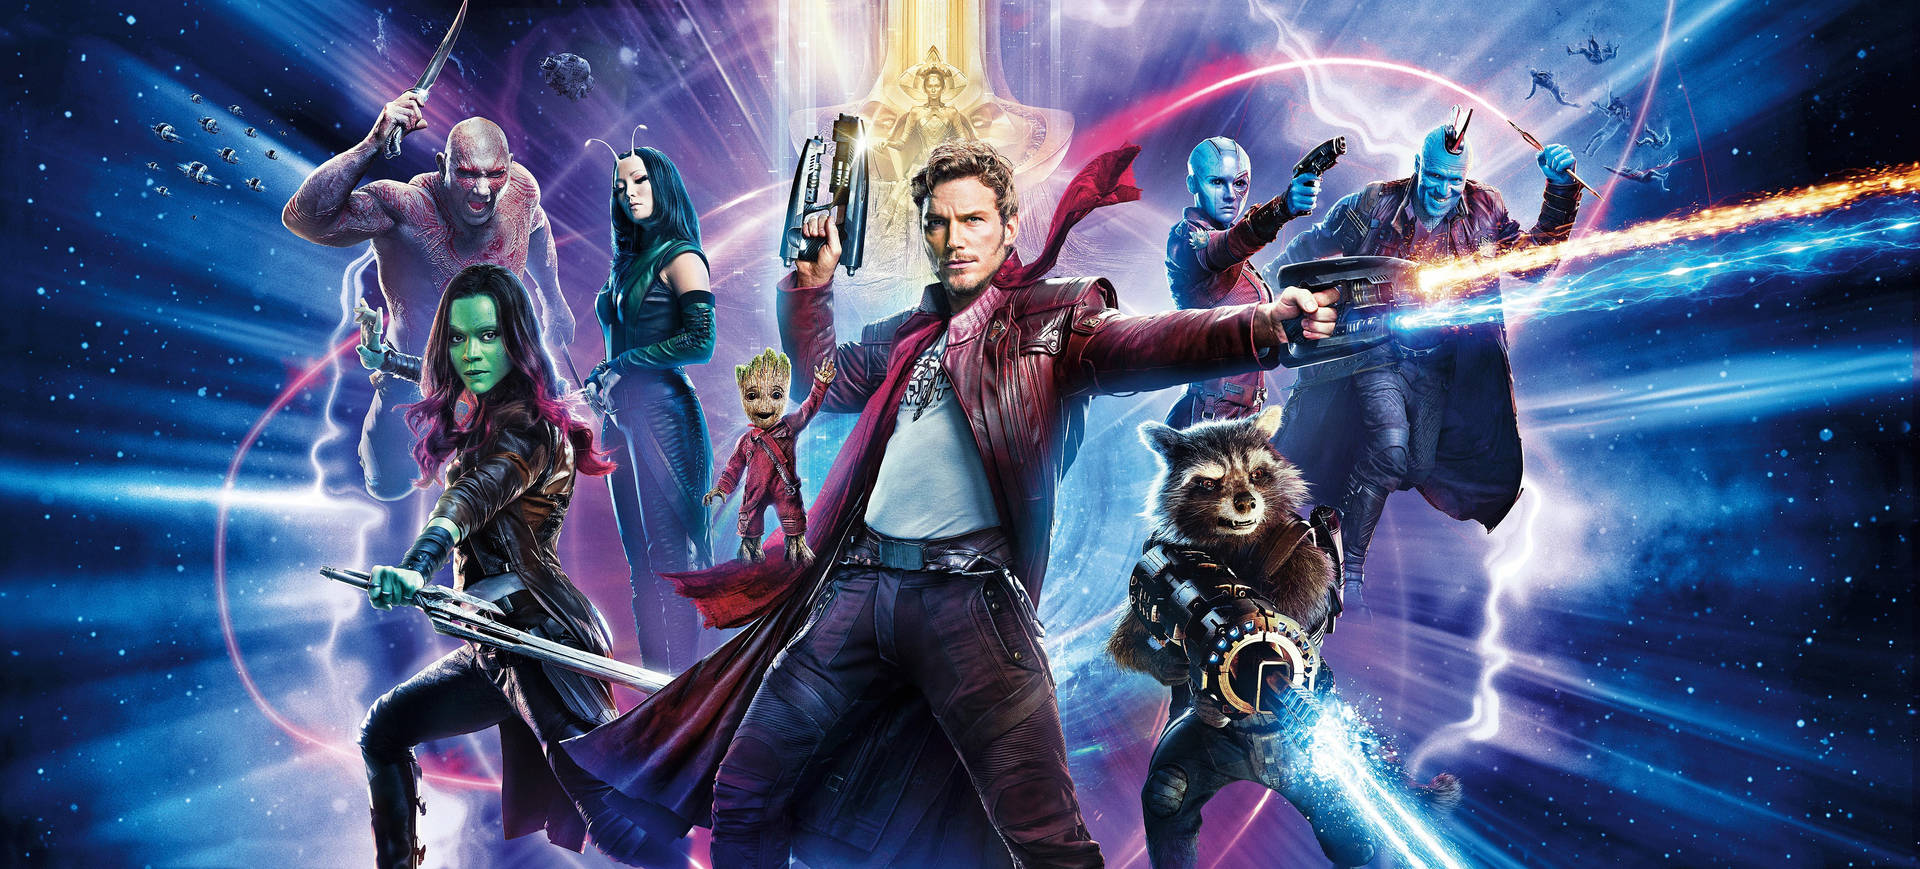 The Guardians of the Galaxy Ready for Adventure Wallpaper